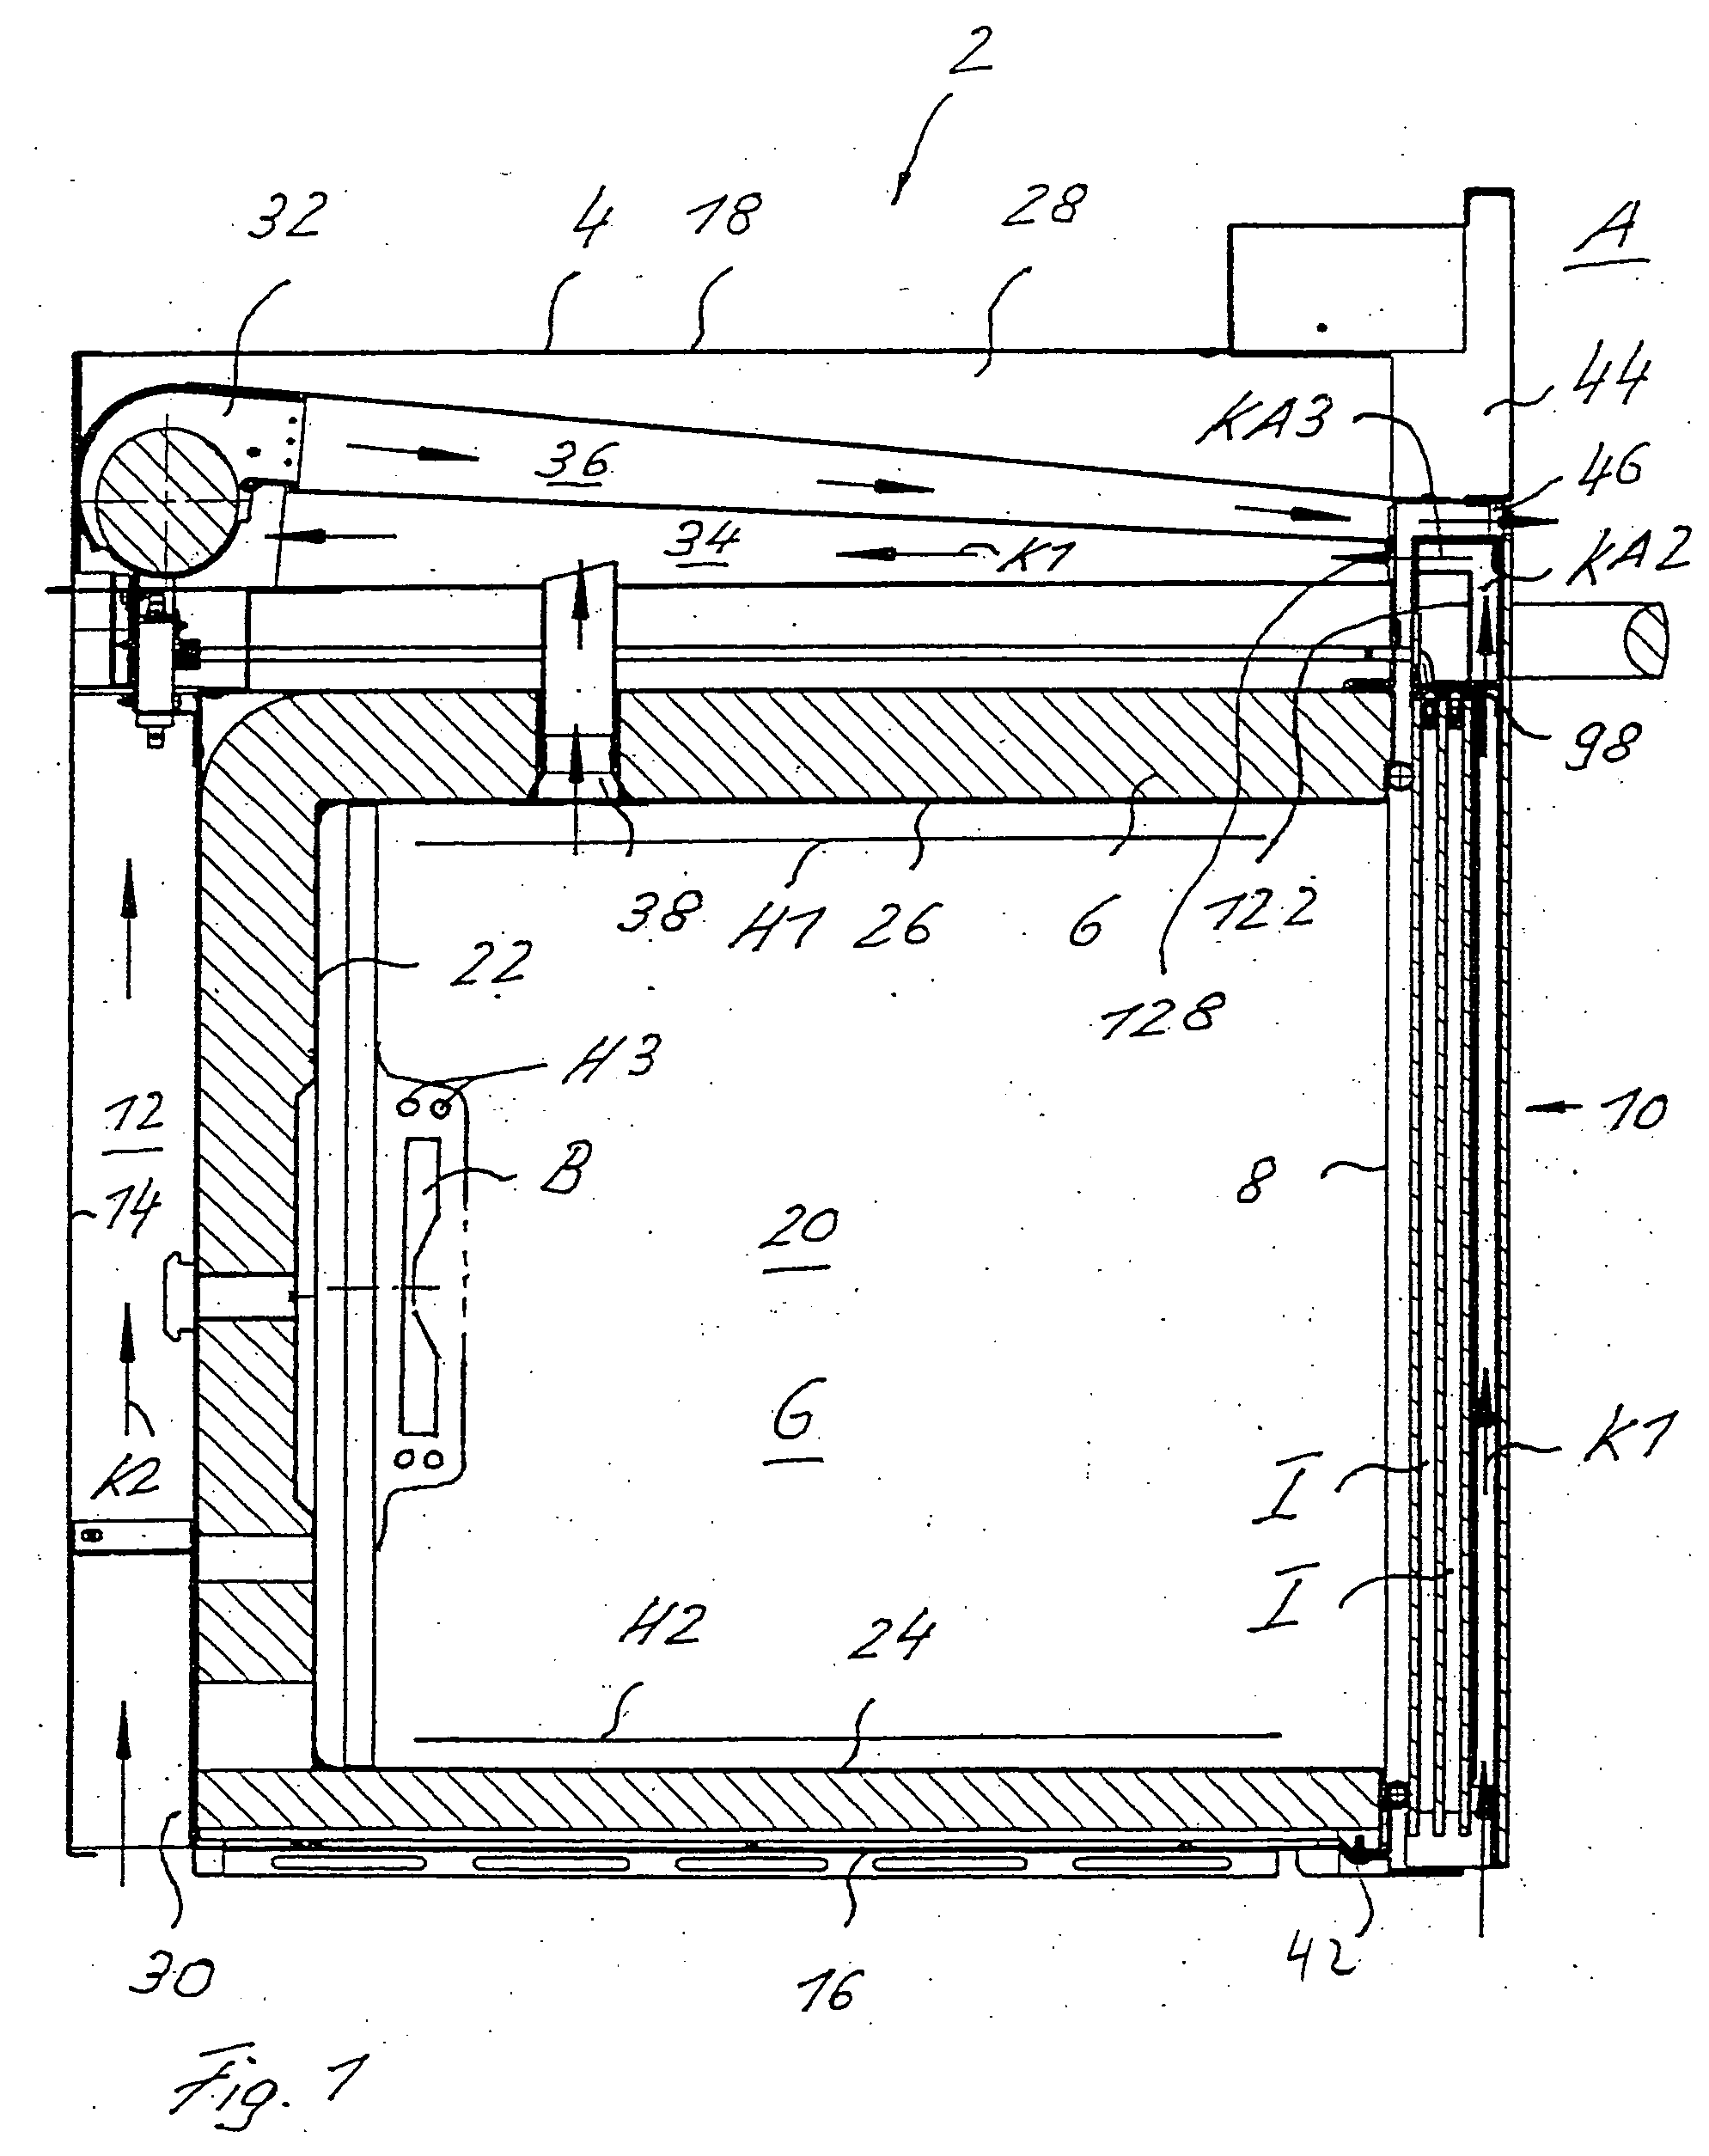 Cooking oven with a cooled door that permits pyrolysis